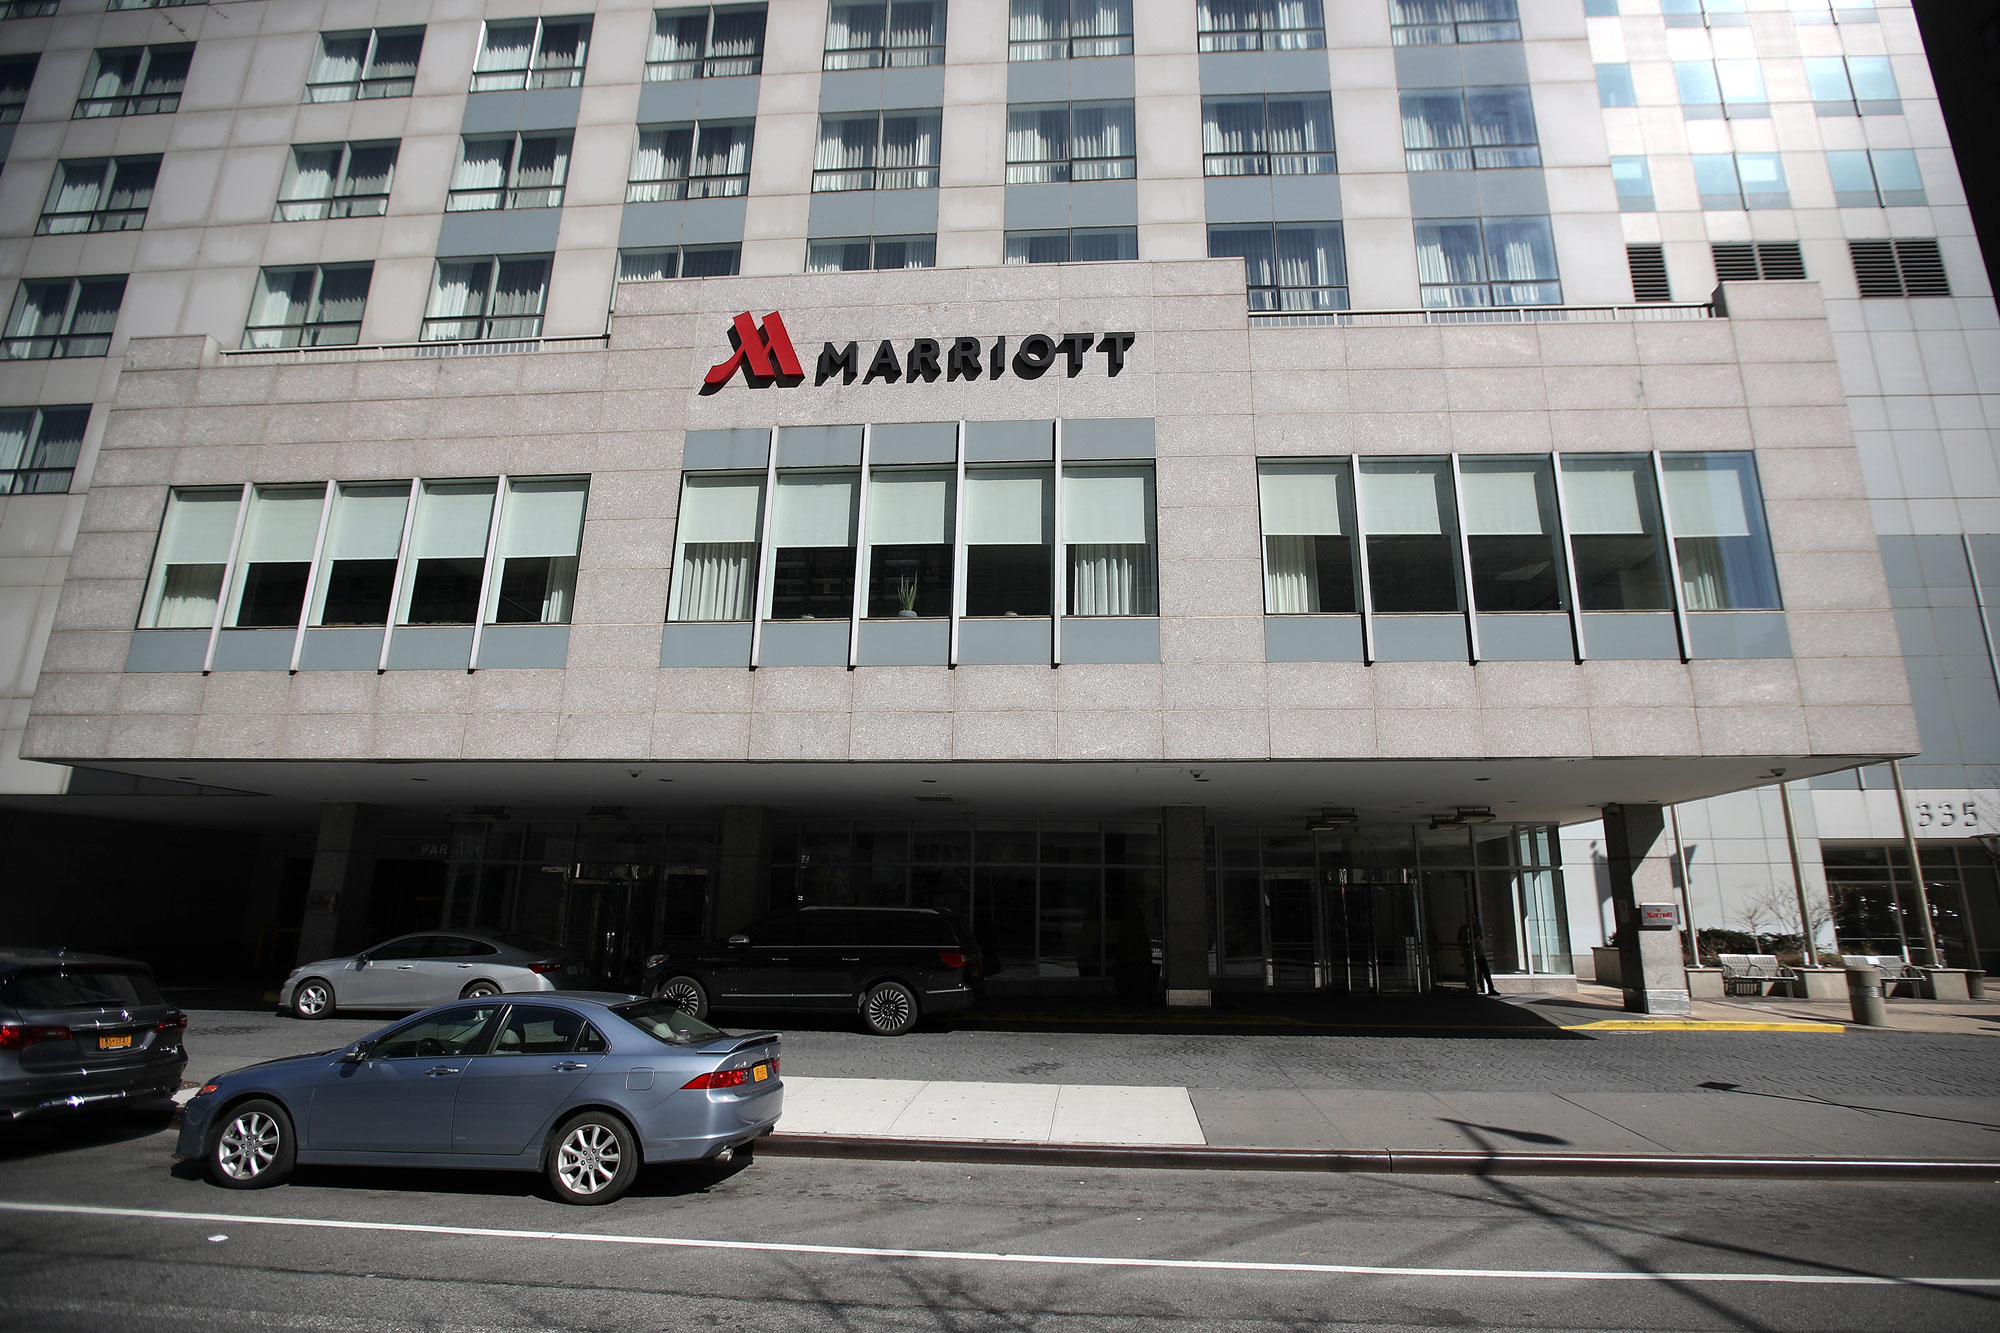 The New York Marriott stands at the Brooklyn Bridge on March 27 in the Brooklyn Heights neighborhood of the Brooklyn borough of New York City. 